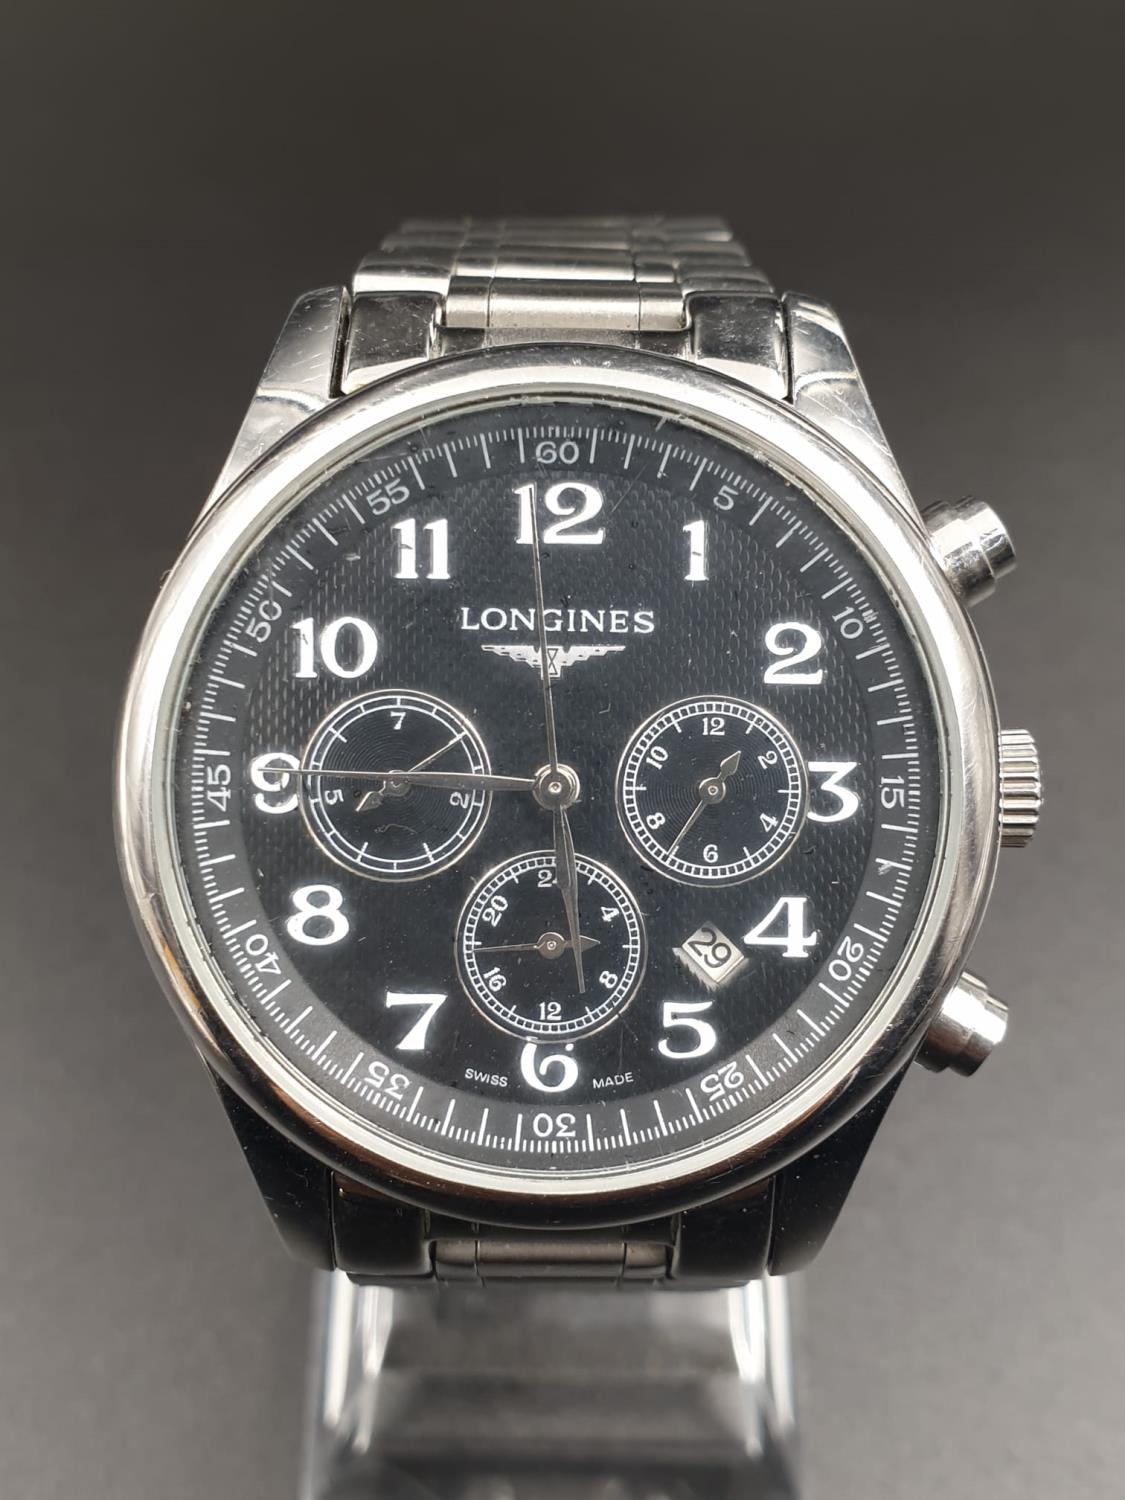 A Longines Automatic Chronograph Watch. Black dial. Stainless steel strap. 35mm case. Good condition